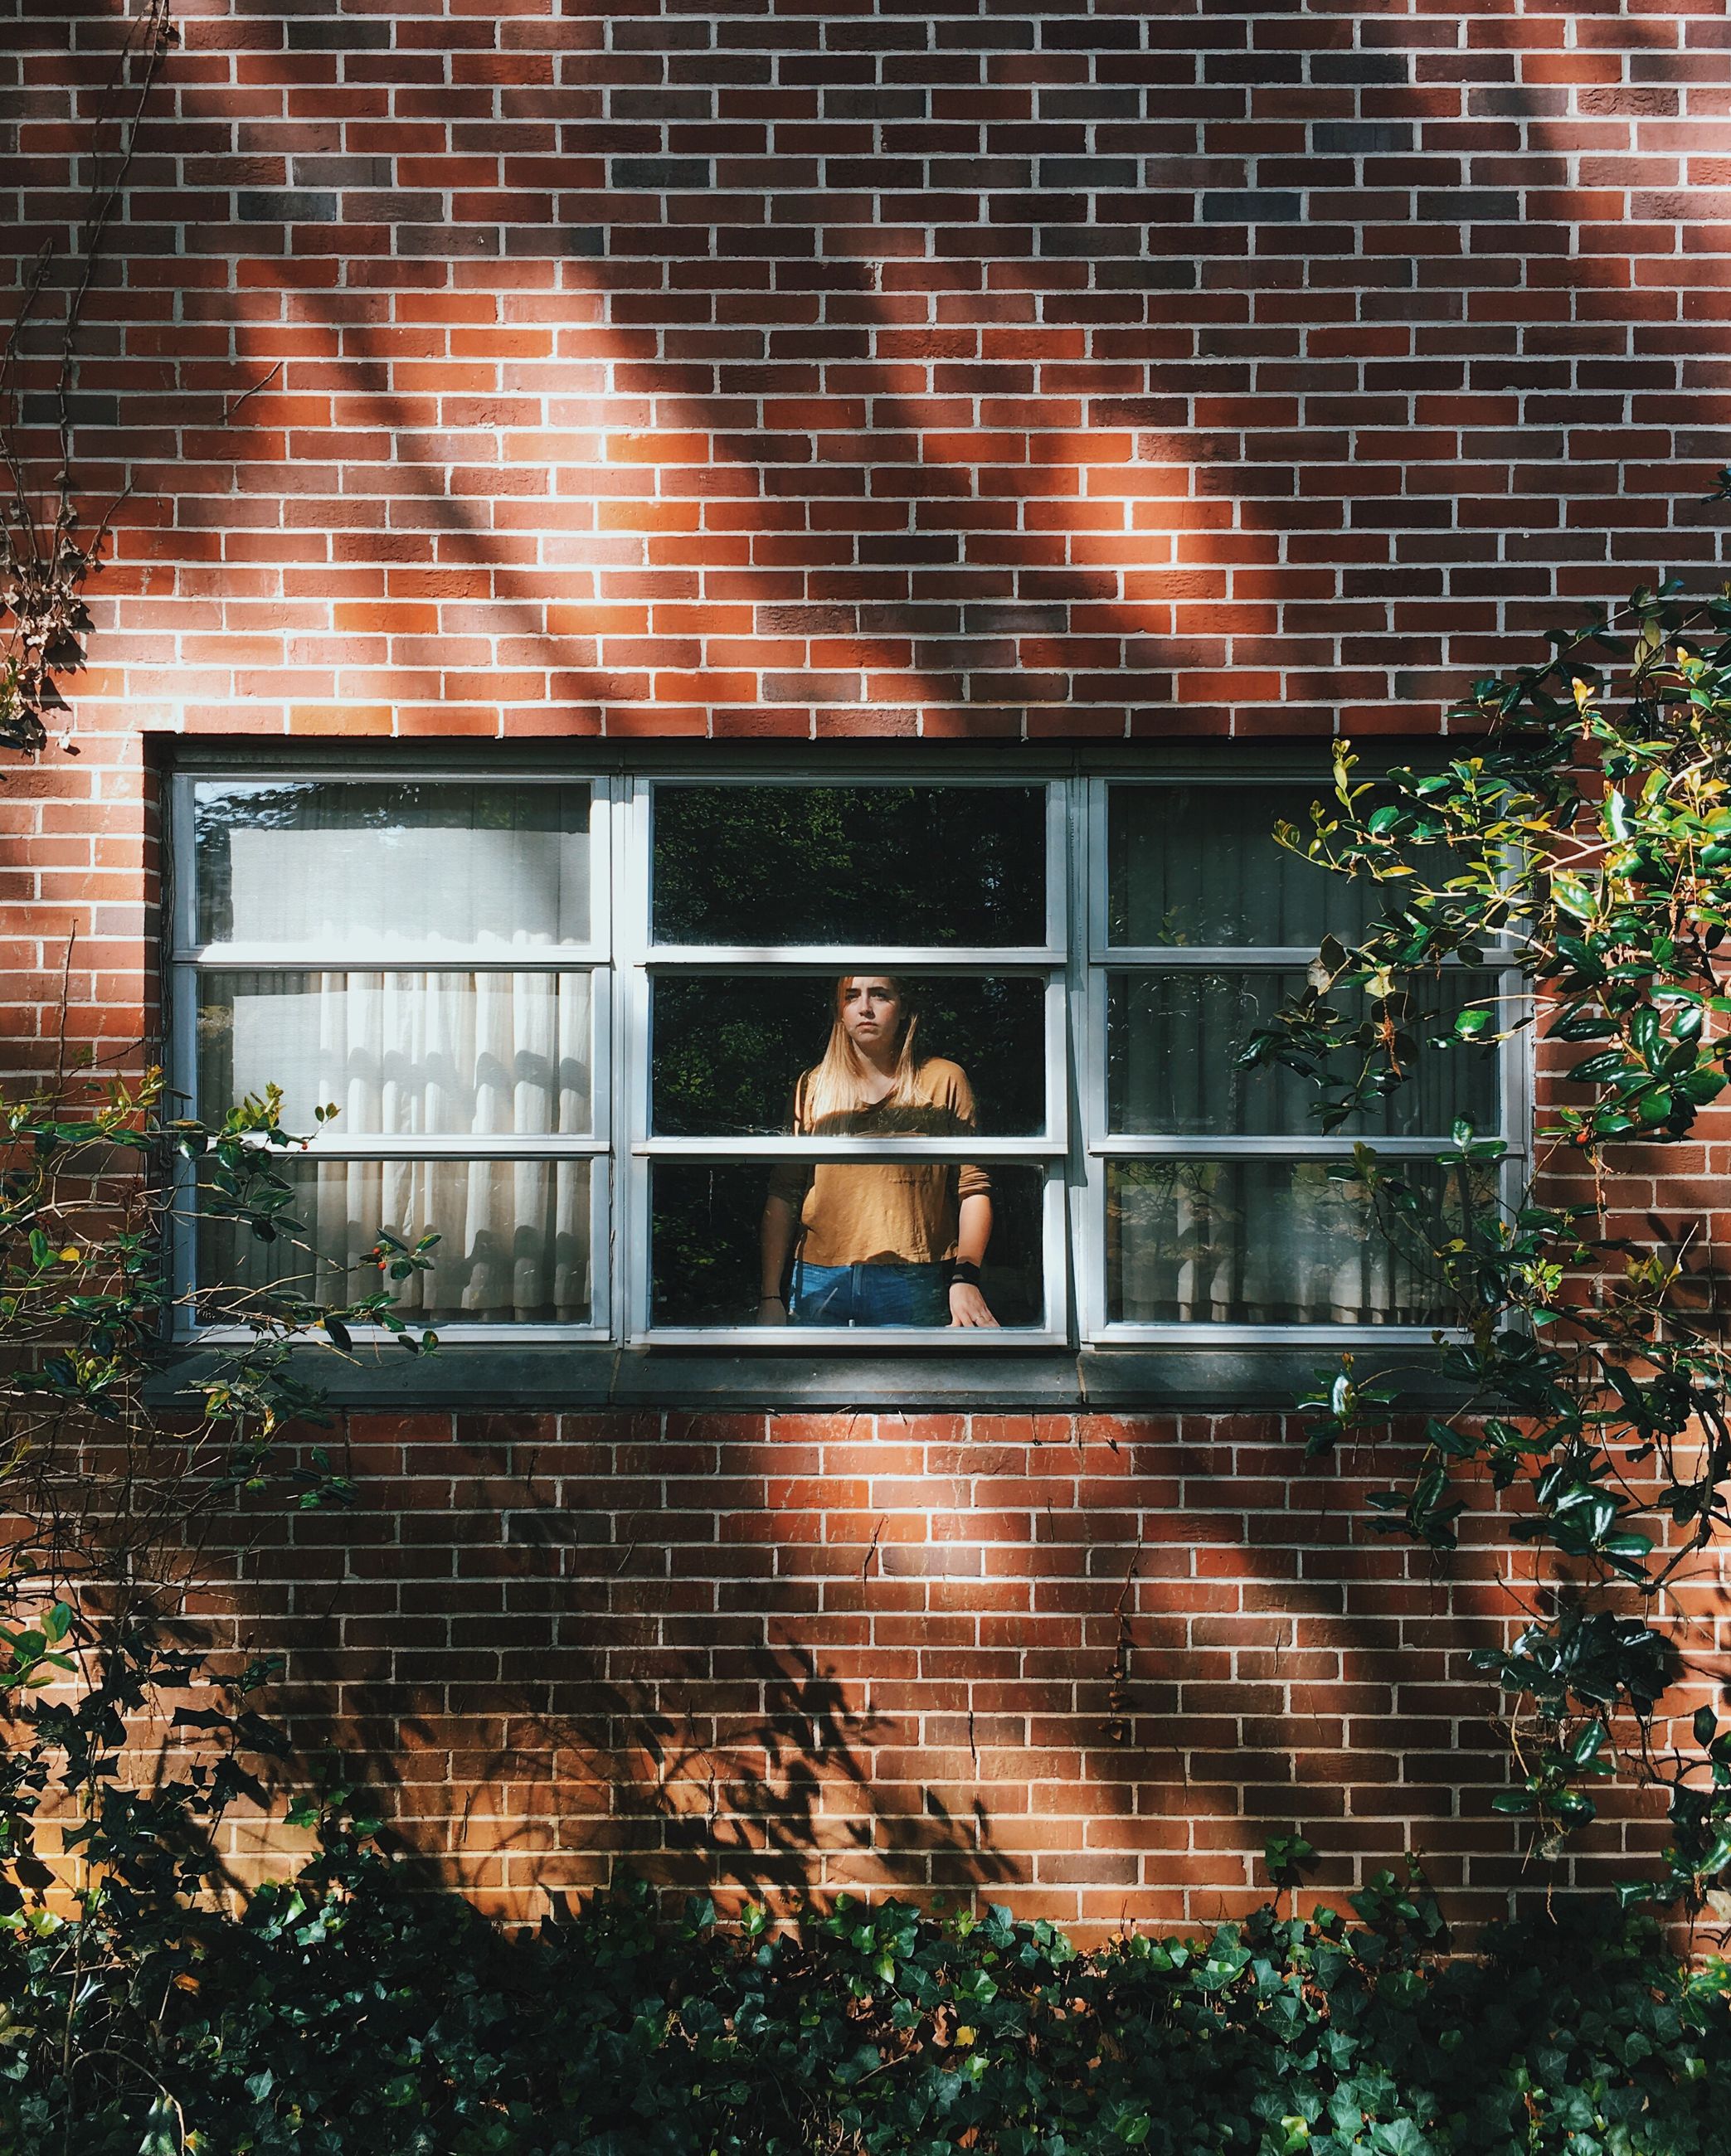 brick wall, window, building exterior, young adult, real people, one person, young women, architecture, full length, lifestyles, built structure, day, outdoors, leisure activity, standing, women, tree, people